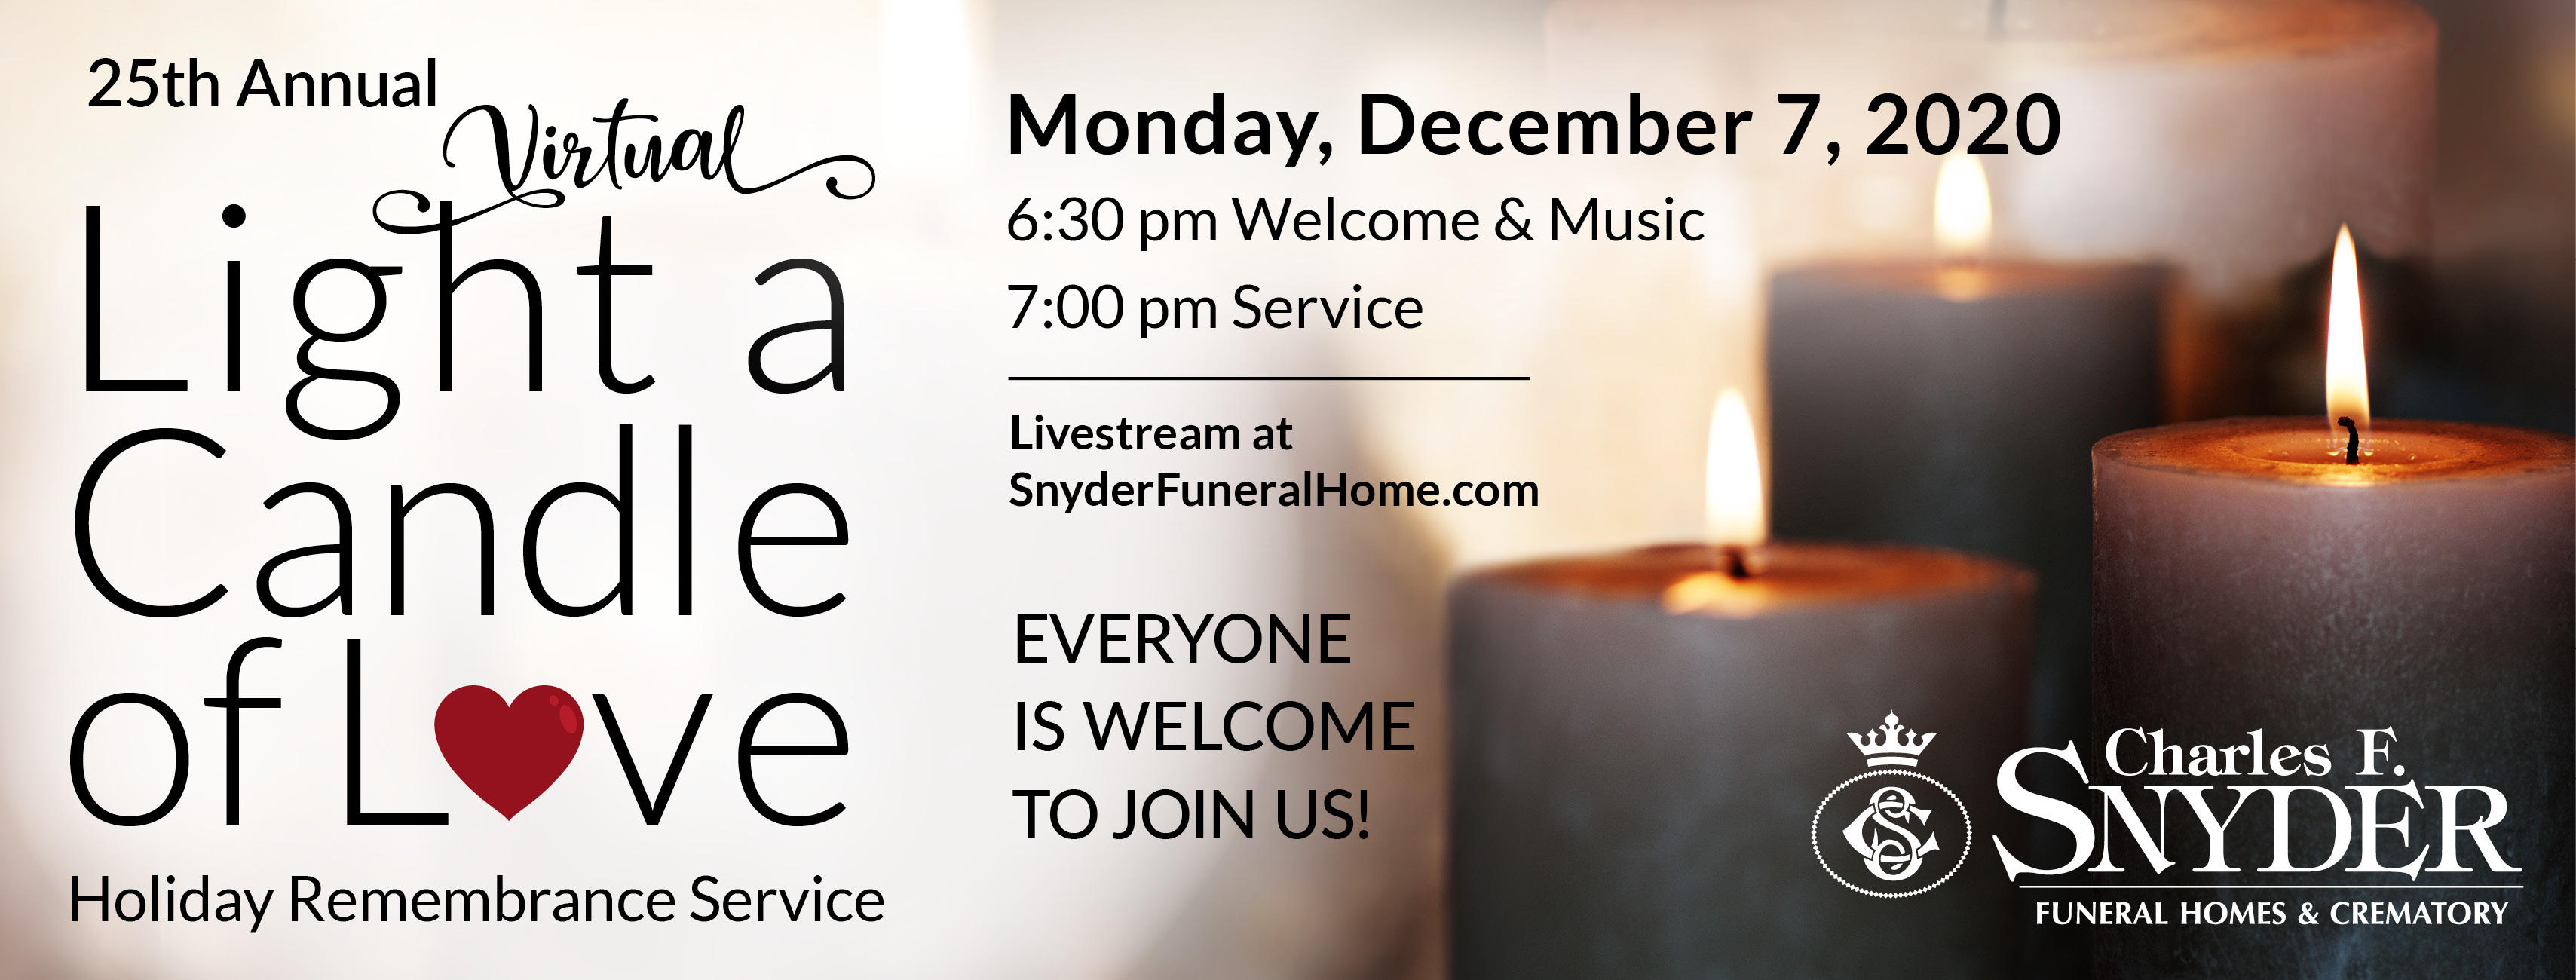 Charles F Snyder Funeral Home & Crematory - Millersville